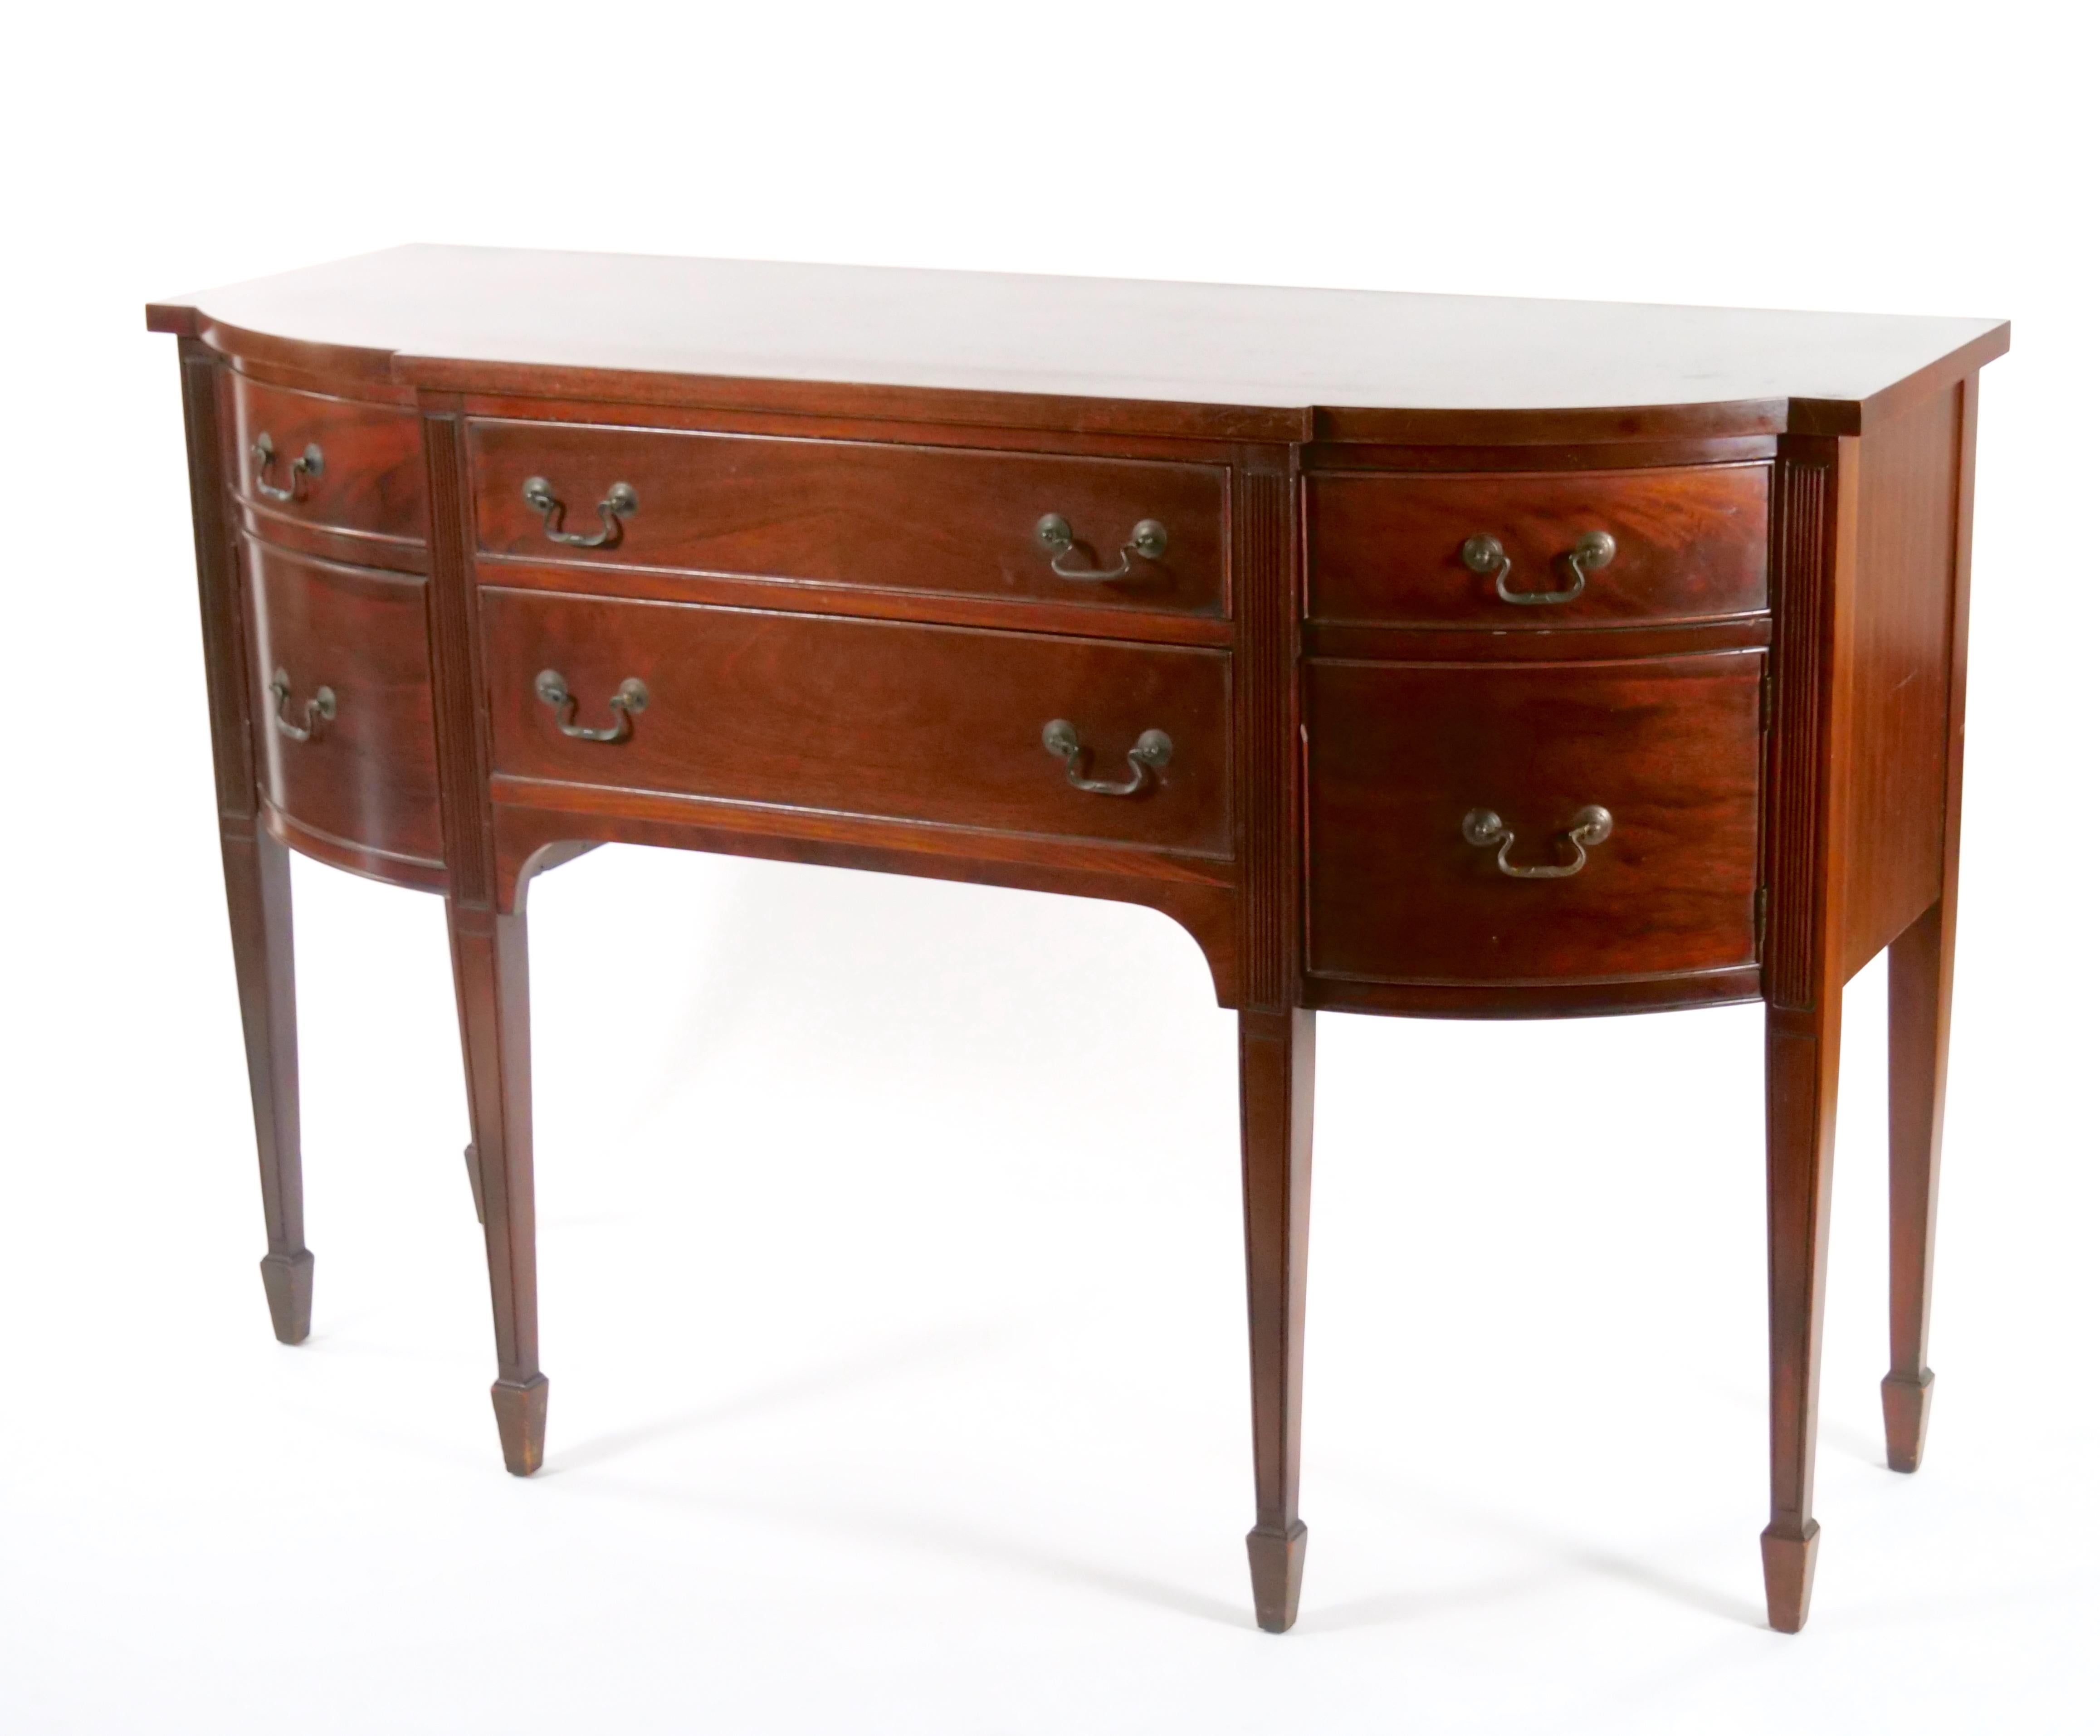 19th century Mahogany Wood Bow Front Buffet / Server  For Sale 3